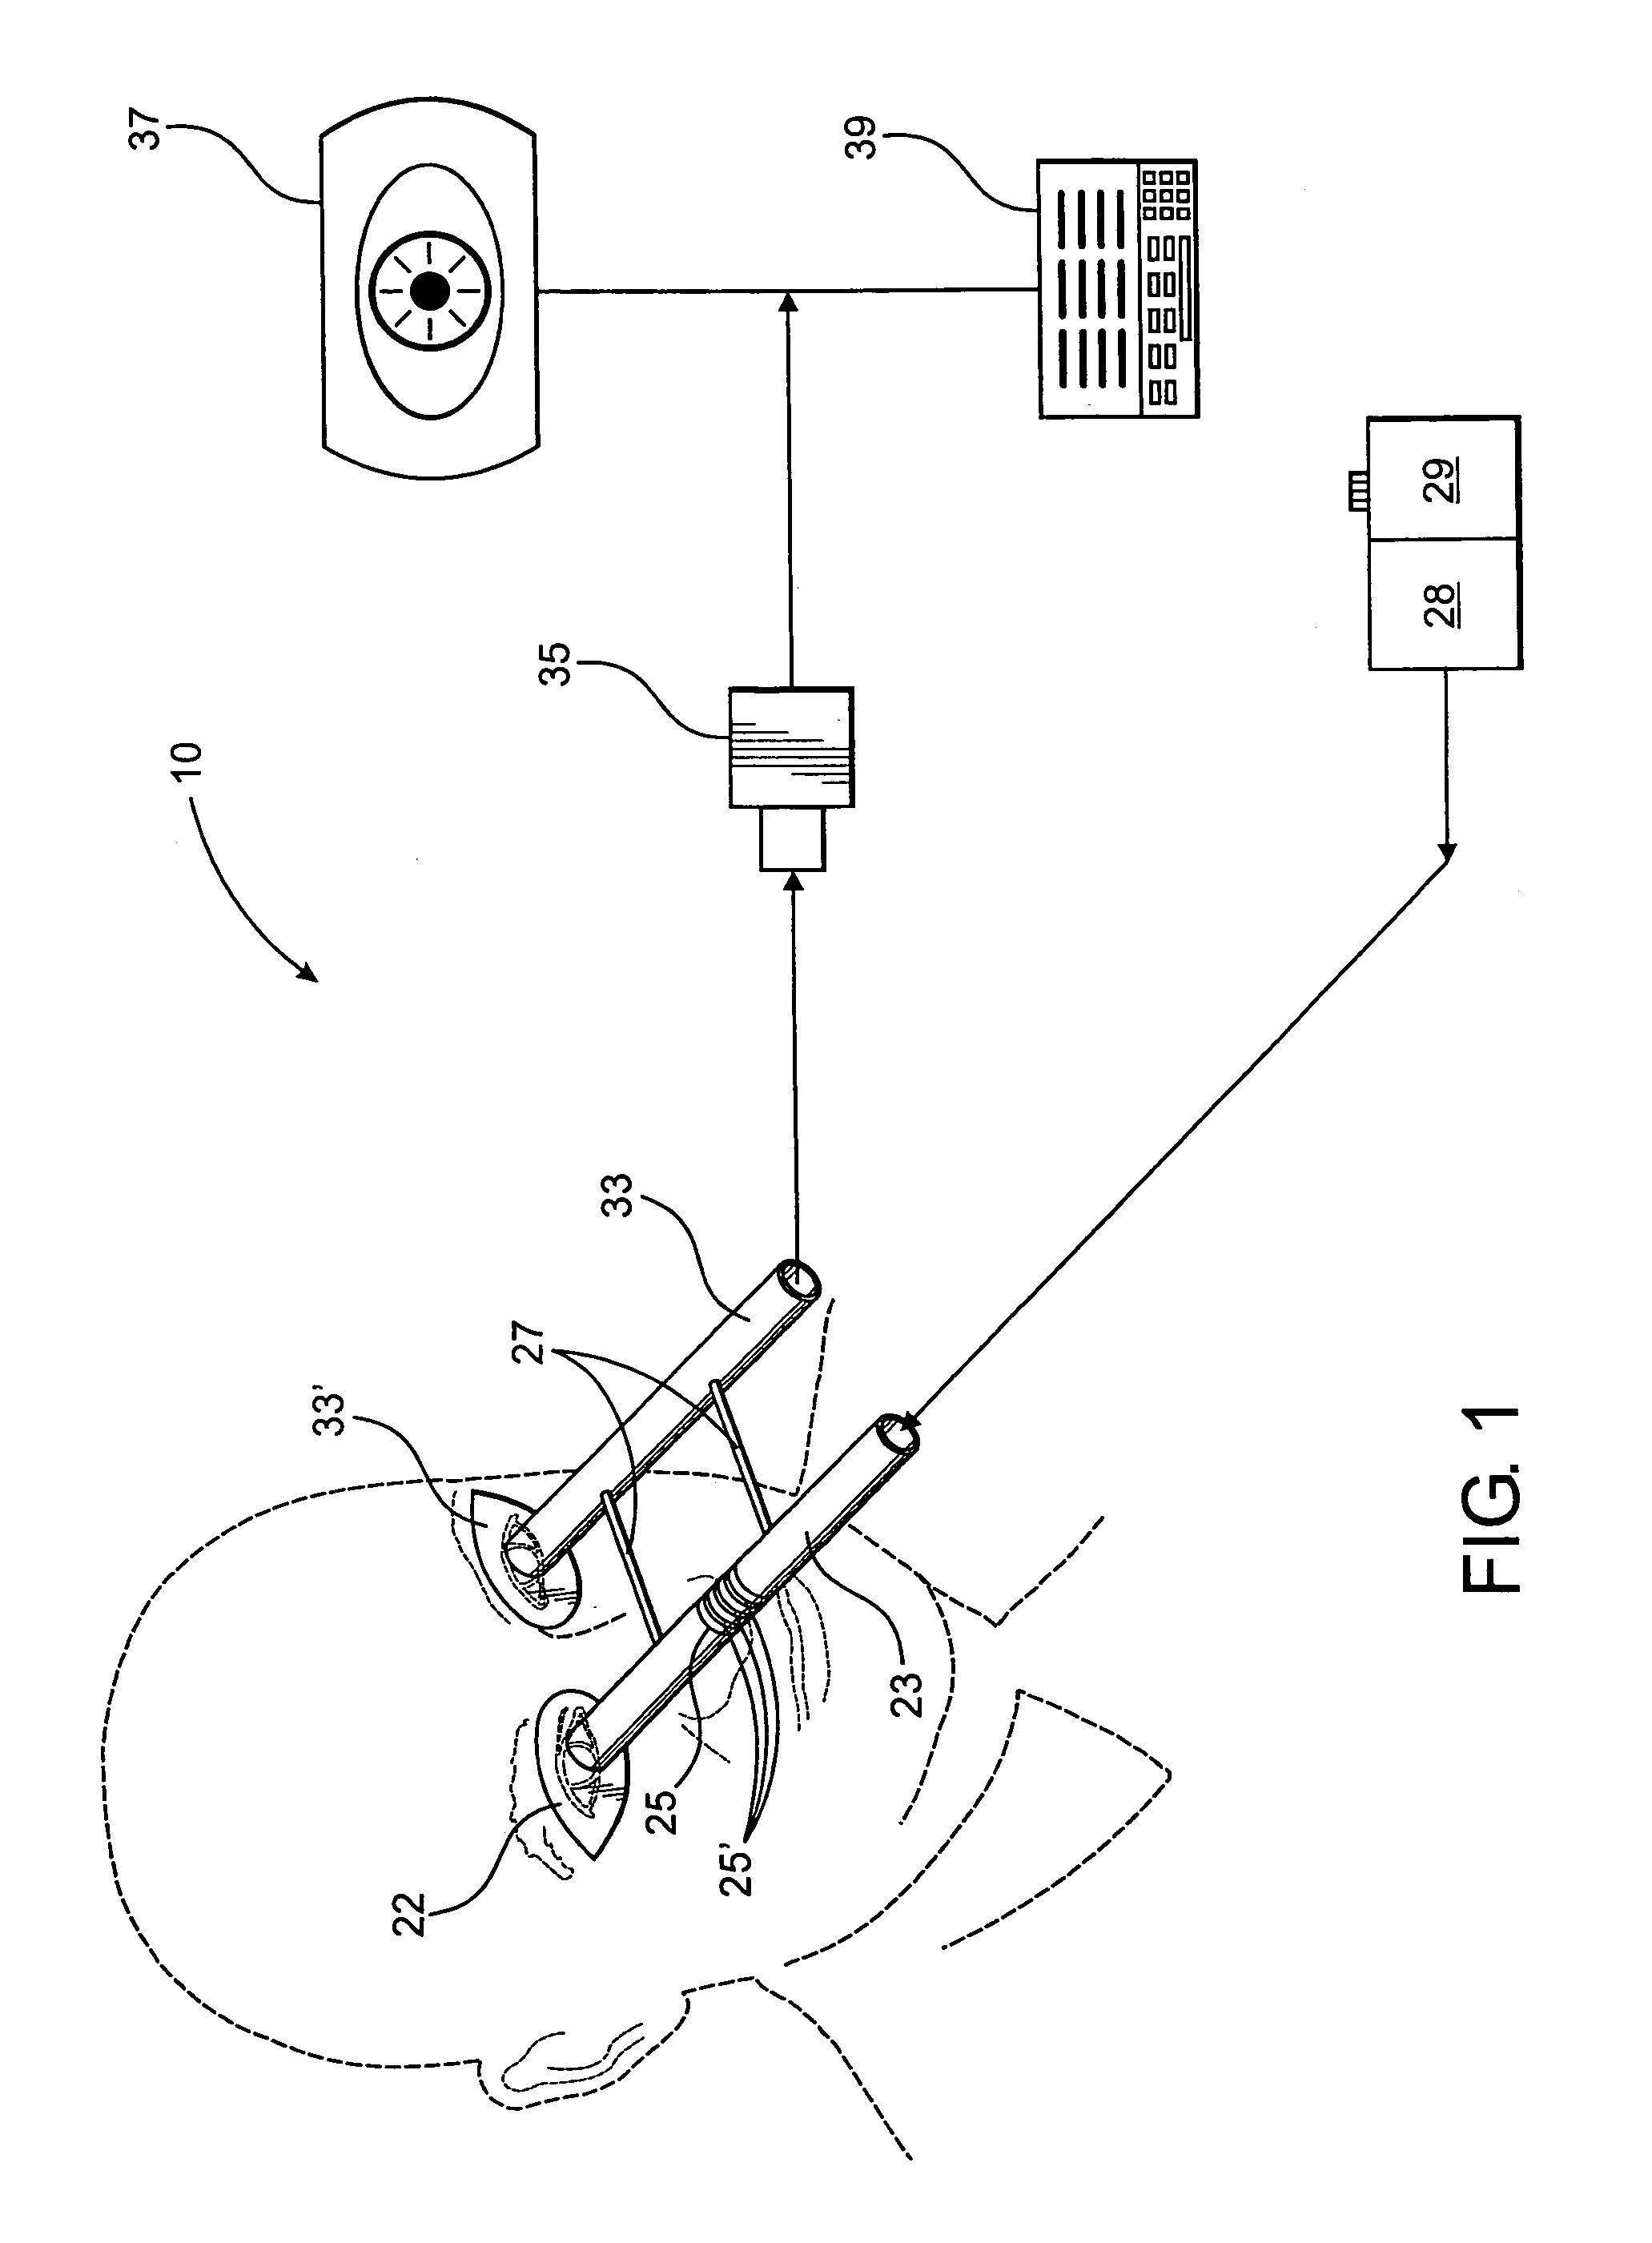 System and method for inducing and measuring a consensual pupillary response